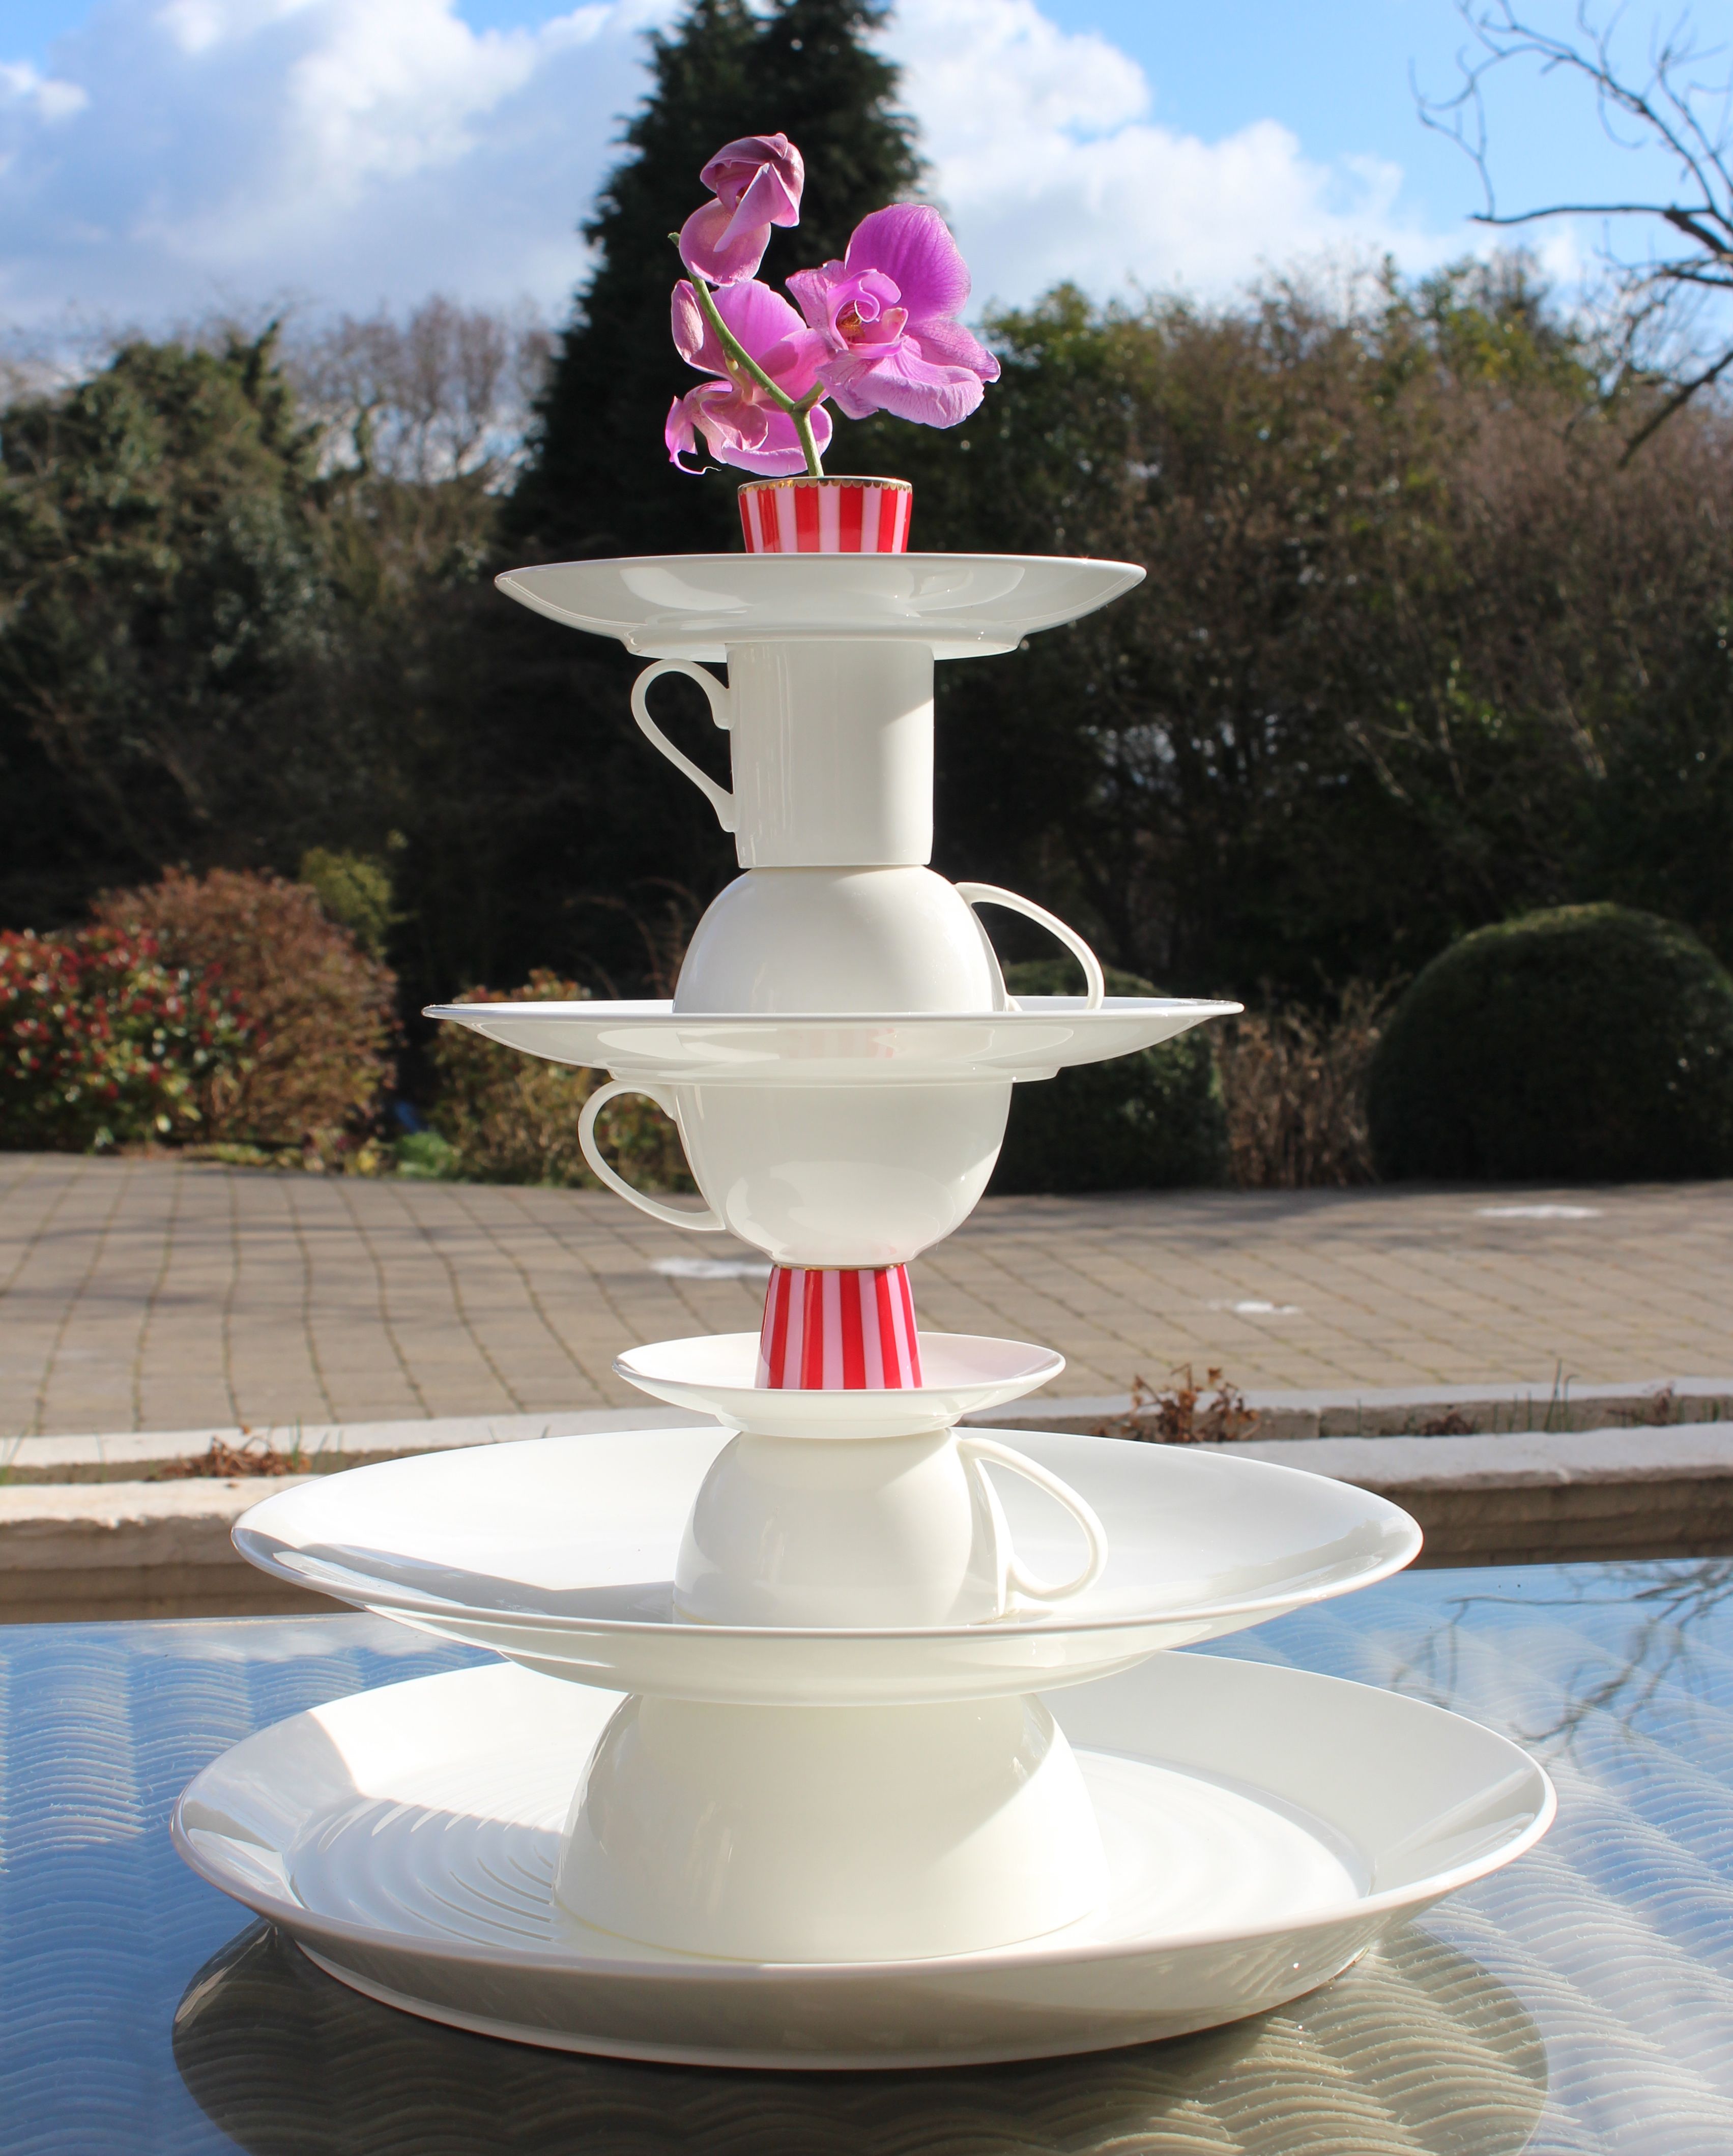 DIY Mad Hatter cake stand